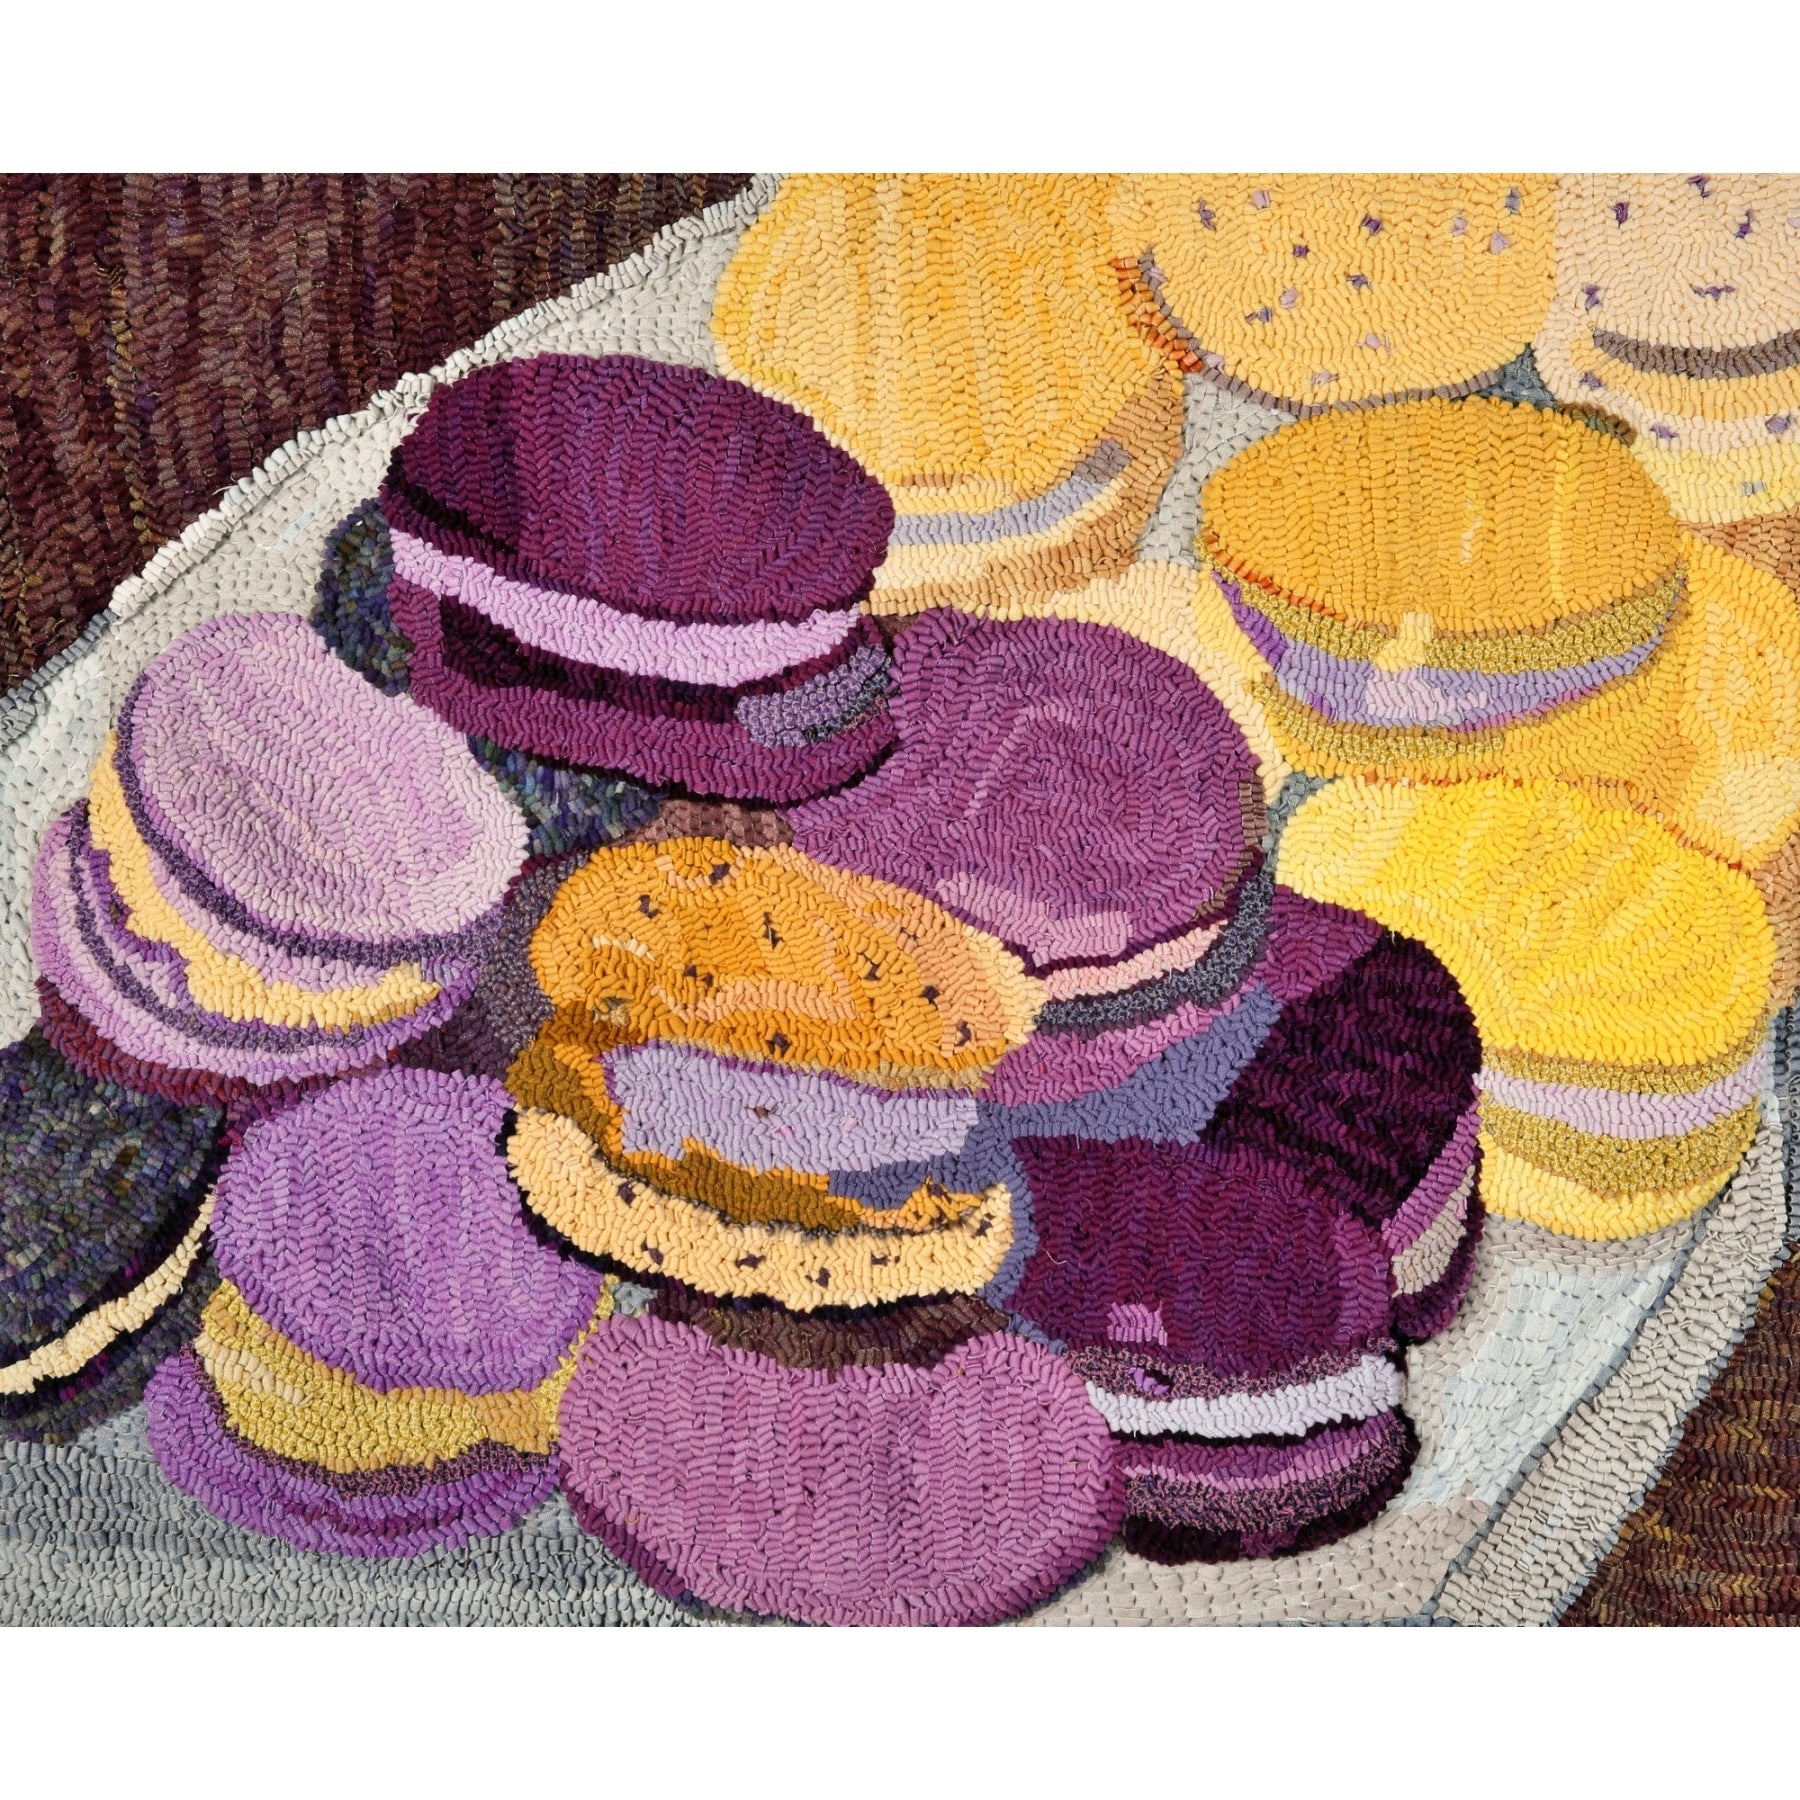 Plate of Macaroons, rug hooked by Victoria Rudolph